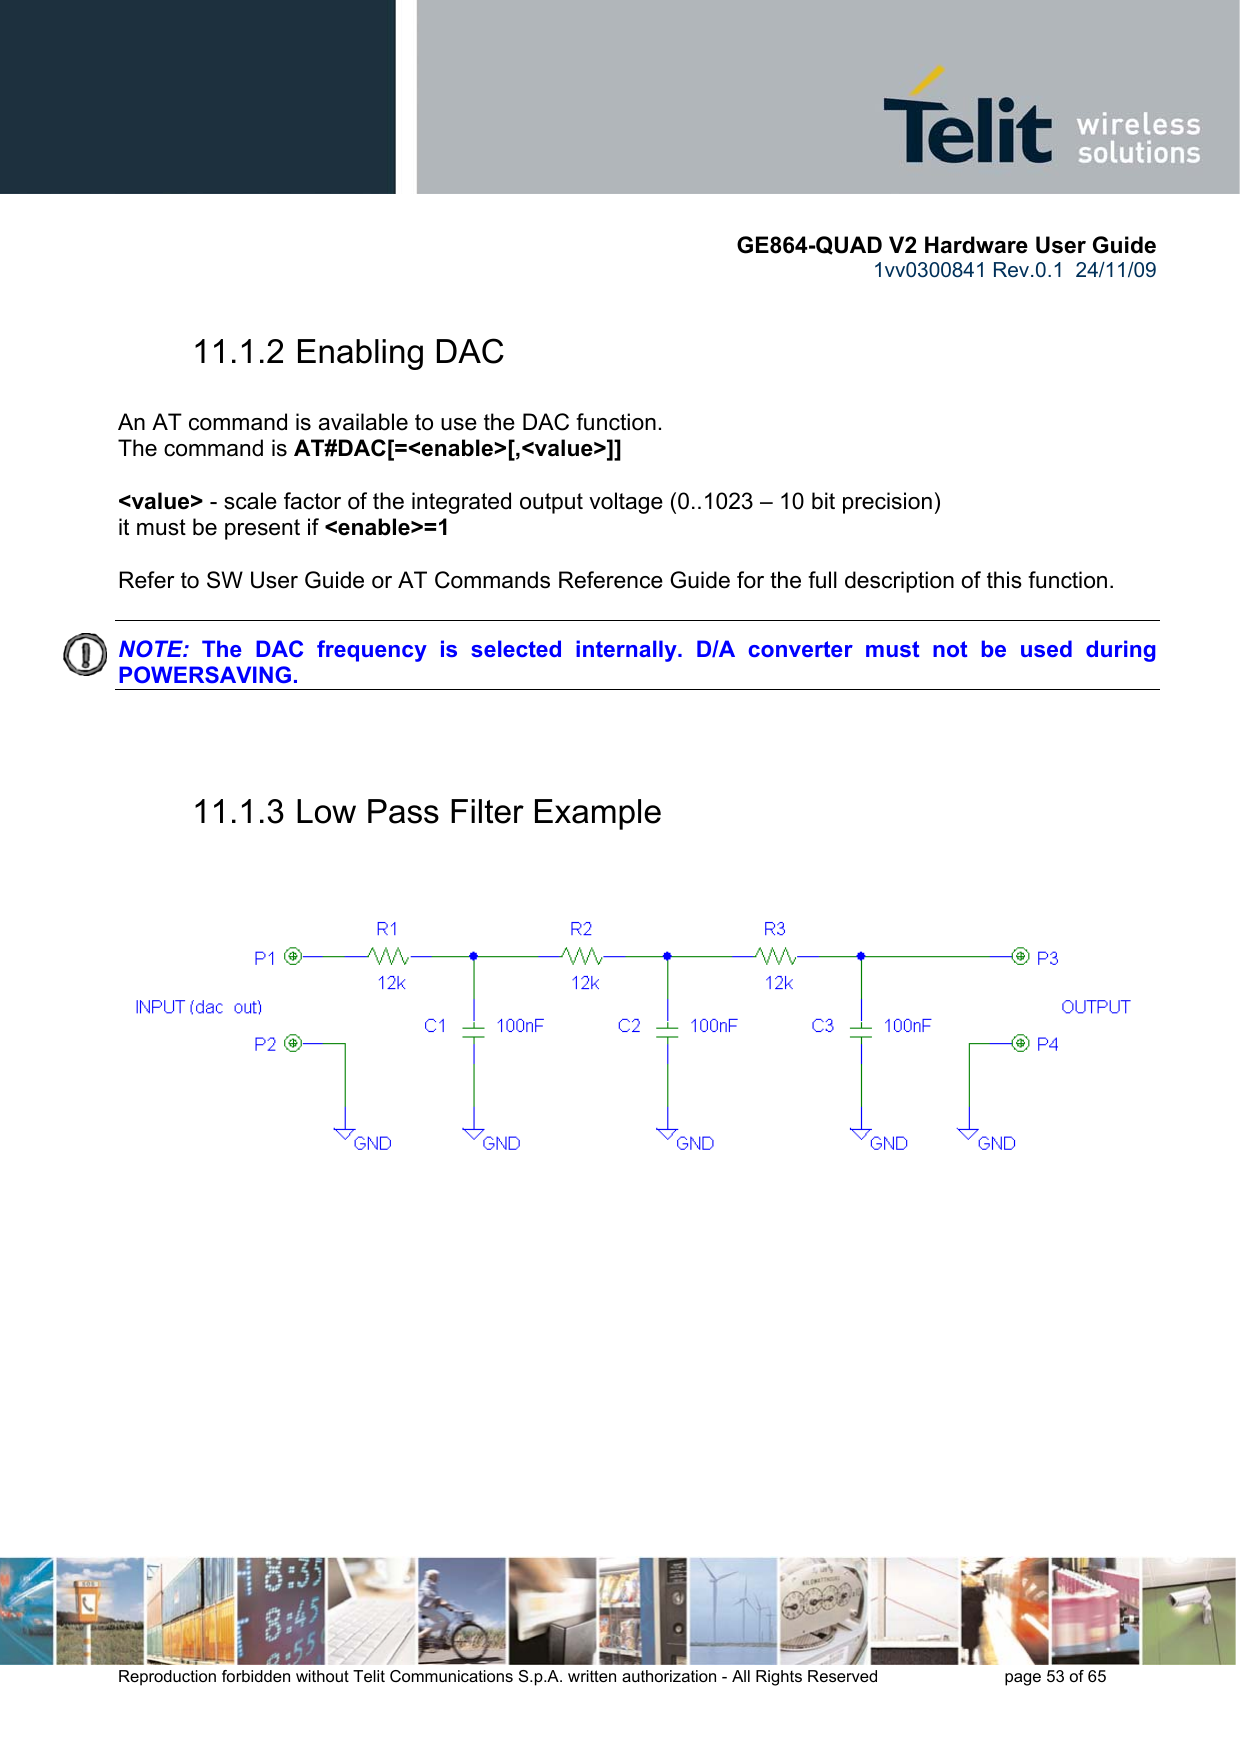       GE864-QUAD V2 Hardware User Guide 1vv0300841 Rev.0.1  24/11/09      Reproduction forbidden without Telit Communications S.p.A. written authorization - All Rights Reserved    page 53 of 65  11.1.2 Enabling DAC  An AT command is available to use the DAC function. The command is AT#DAC[=&lt;enable&gt;[,&lt;value&gt;]]  &lt;value&gt; - scale factor of the integrated output voltage (0..1023 – 10 bit precision) it must be present if &lt;enable&gt;=1  Refer to SW User Guide or AT Commands Reference Guide for the full description of this function.  NOTE:  The DAC frequency is selected internally. D/A converter must not be used during POWERSAVING.   11.1.3 Low Pass Filter Example     